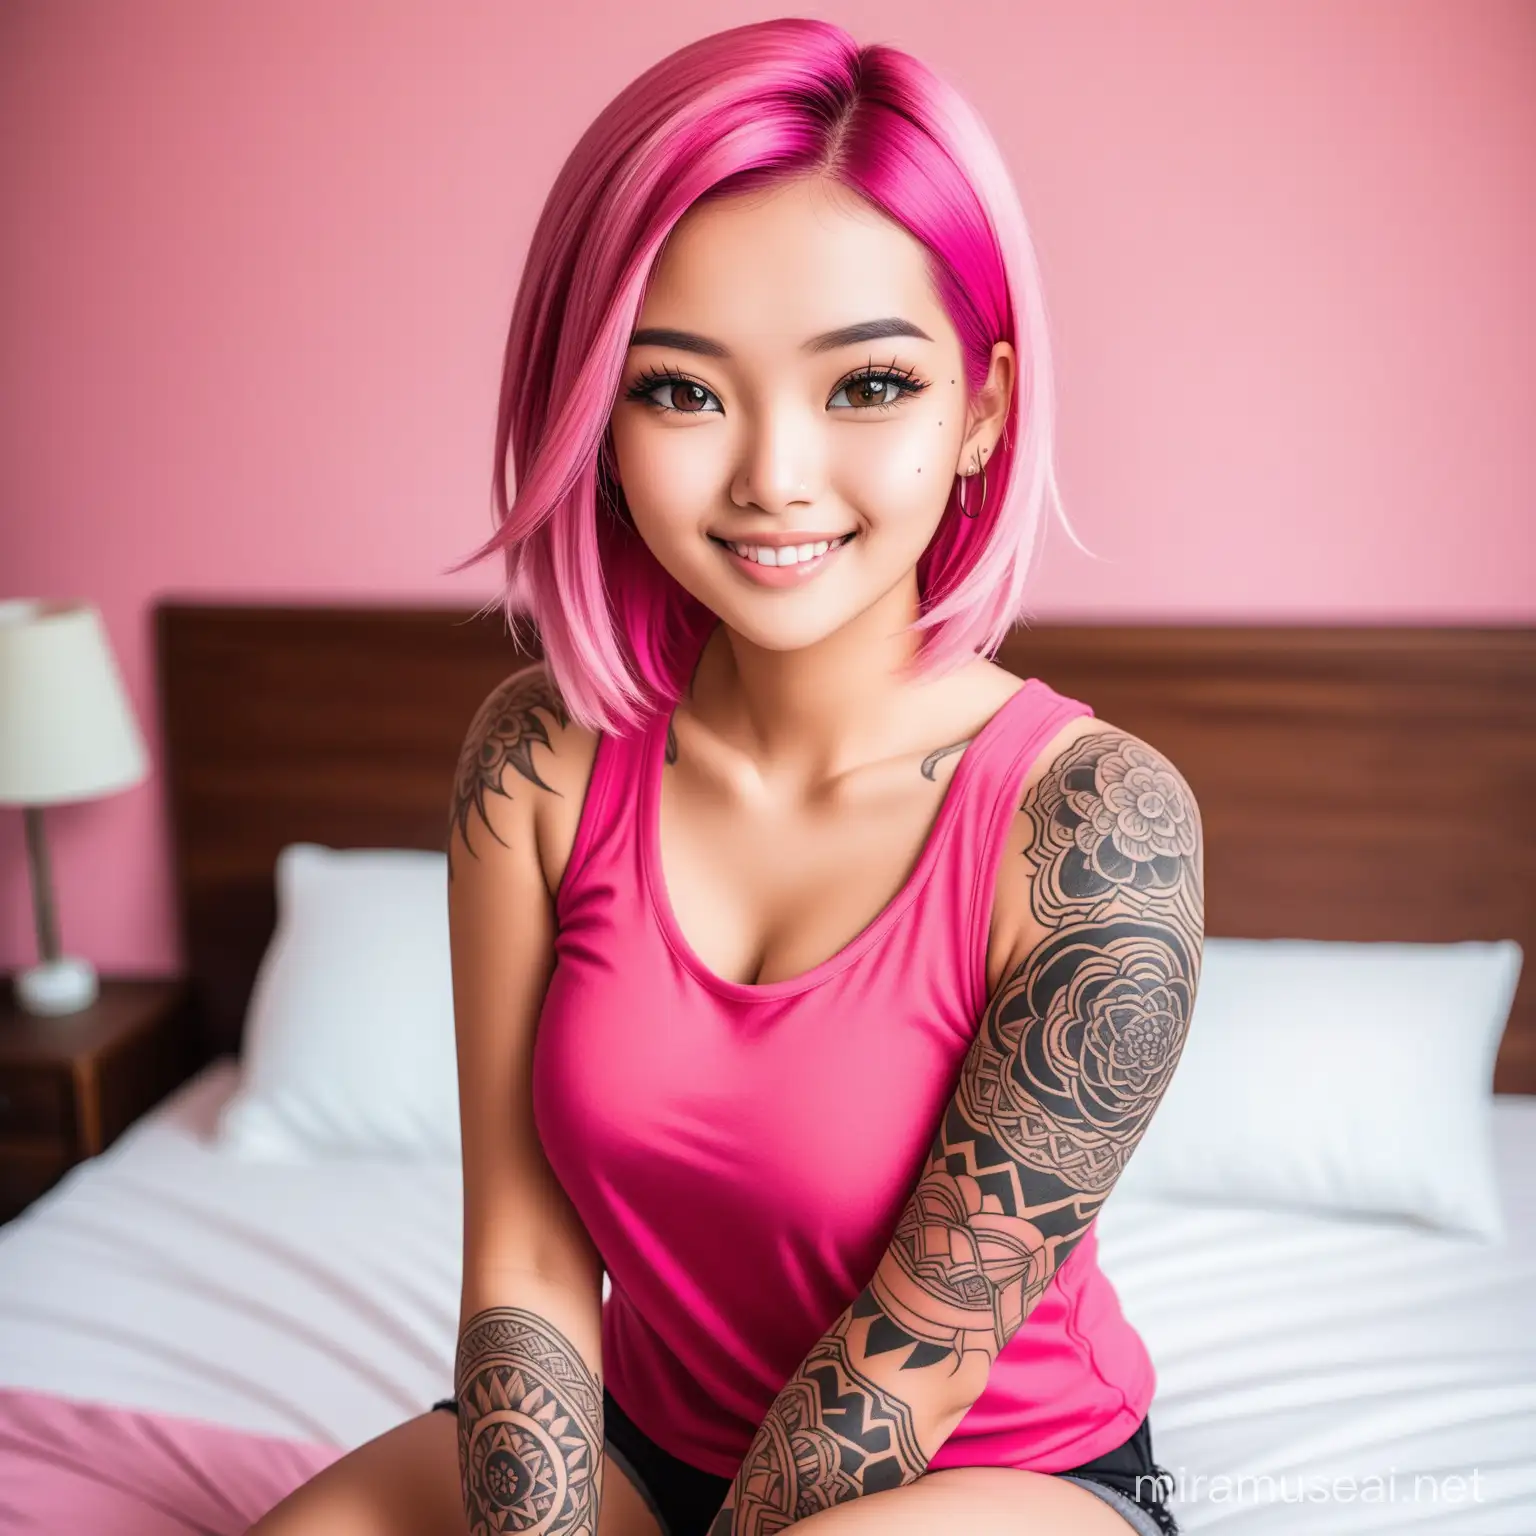 Young Indonesian Woman with Pink Hair Smiling on Bed in Bright Pink Tank Top